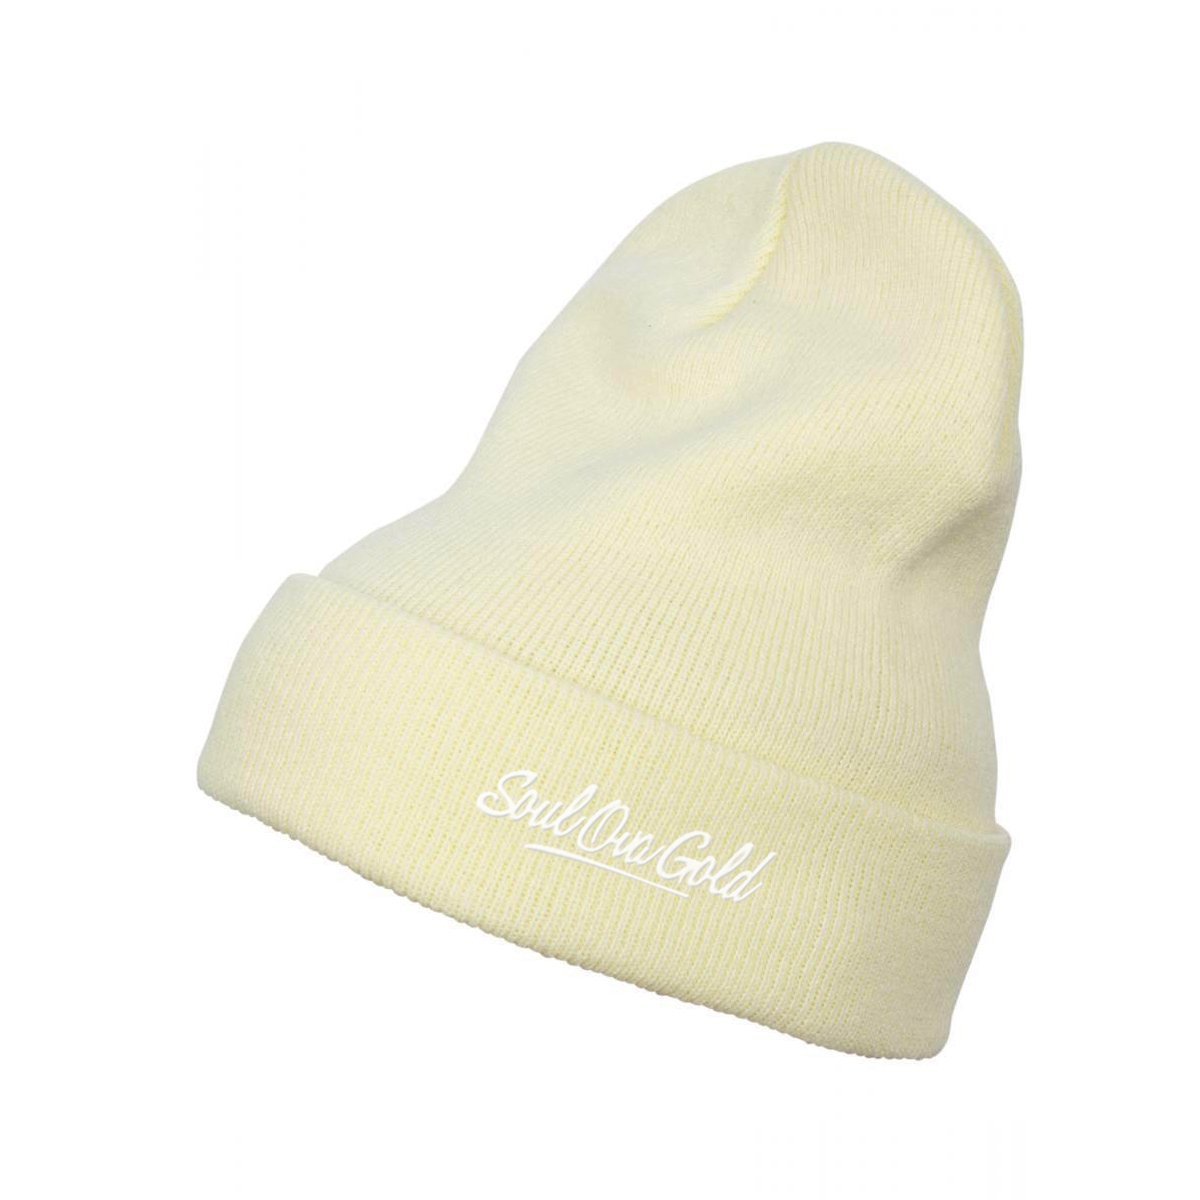 Soul Ova Gold Beanies Stick To The Script Embroidered Beanie (Powder Yellow)